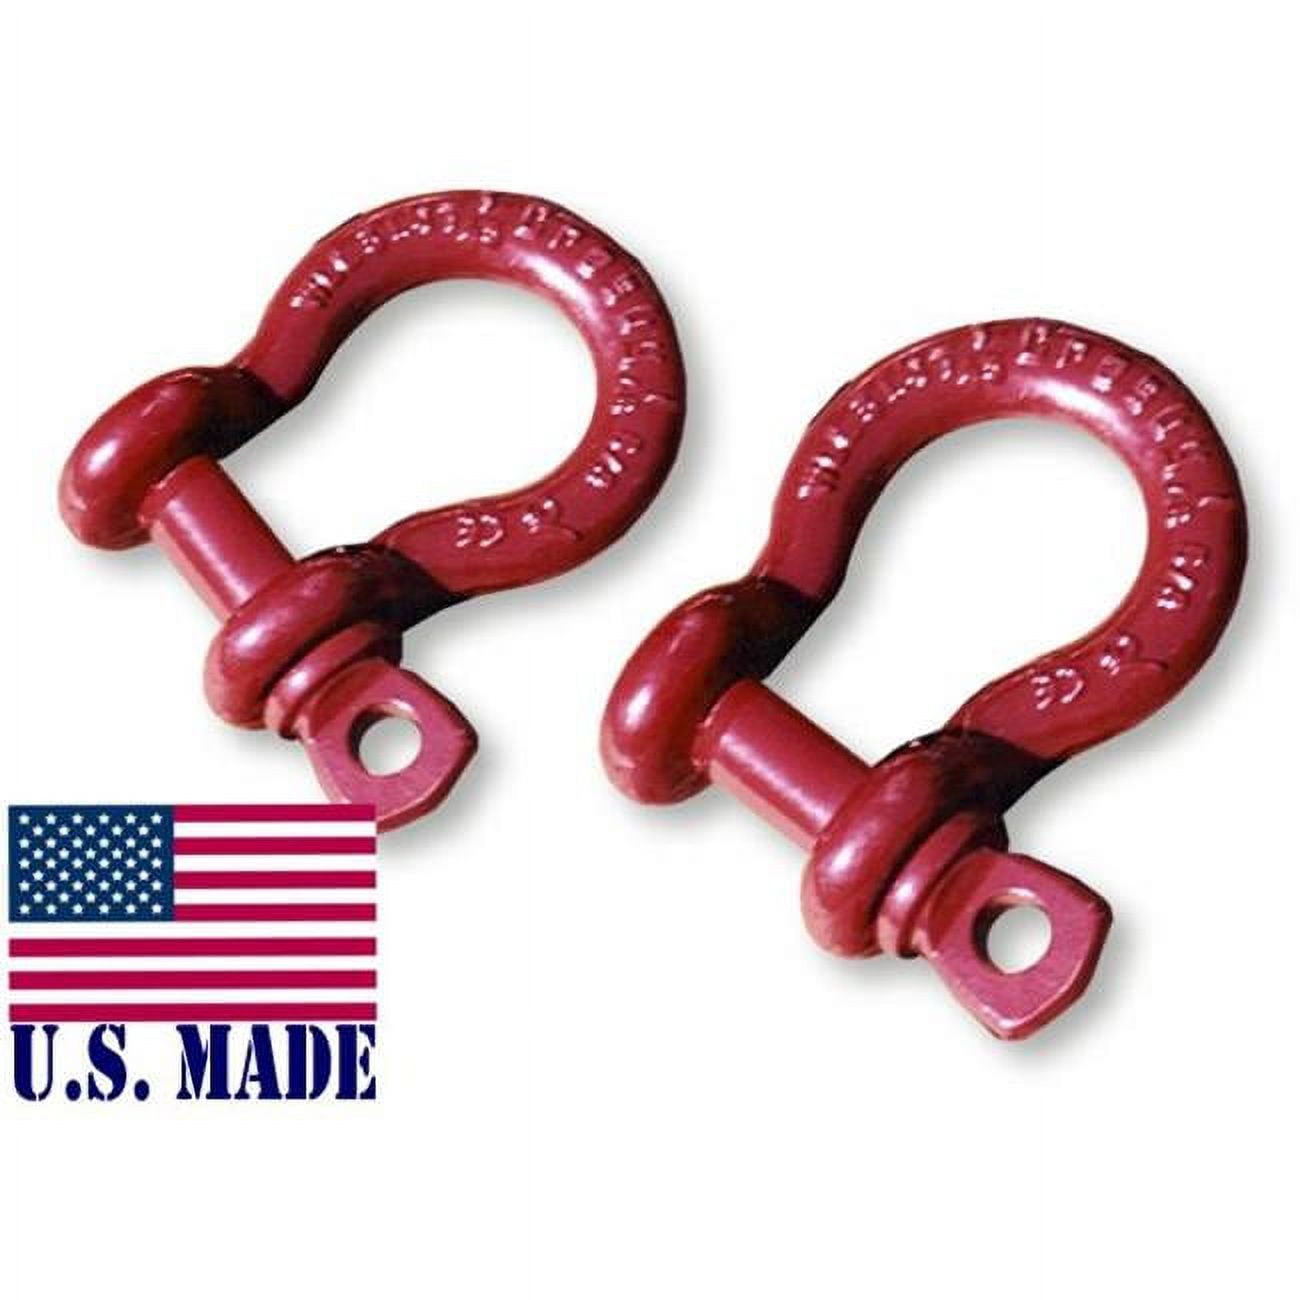 Picture of 1/2 inch ATV D-SHACKLES - North American Made (PAIR) (4X4 VEHICLE RECOVERY)